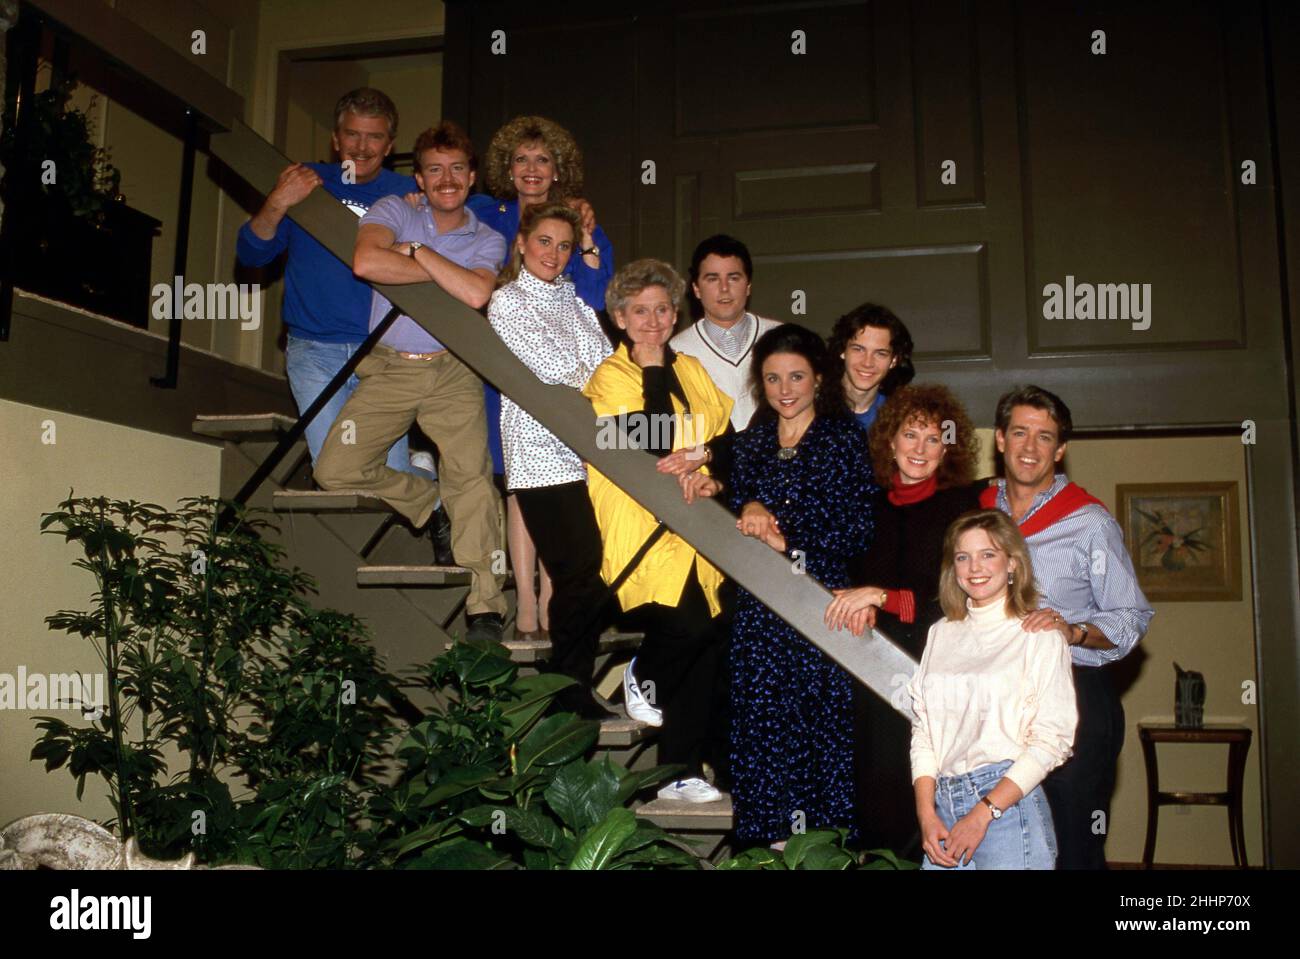 The Brady Bunch Cast - Robert Reed, Mike Lookinland, Florence Henderson, Maureen McCormick, Ann B. Davis and Christopher Knight and Day By Day Cast - Julia Louis-Dreyfuss, Christopher Daniel, Linda Kelsey, Courtney Thorne-Smith and Doug Sheehan Circa 1980's  Credit: Ralph Dominguez/MediaPunch Stock Photo